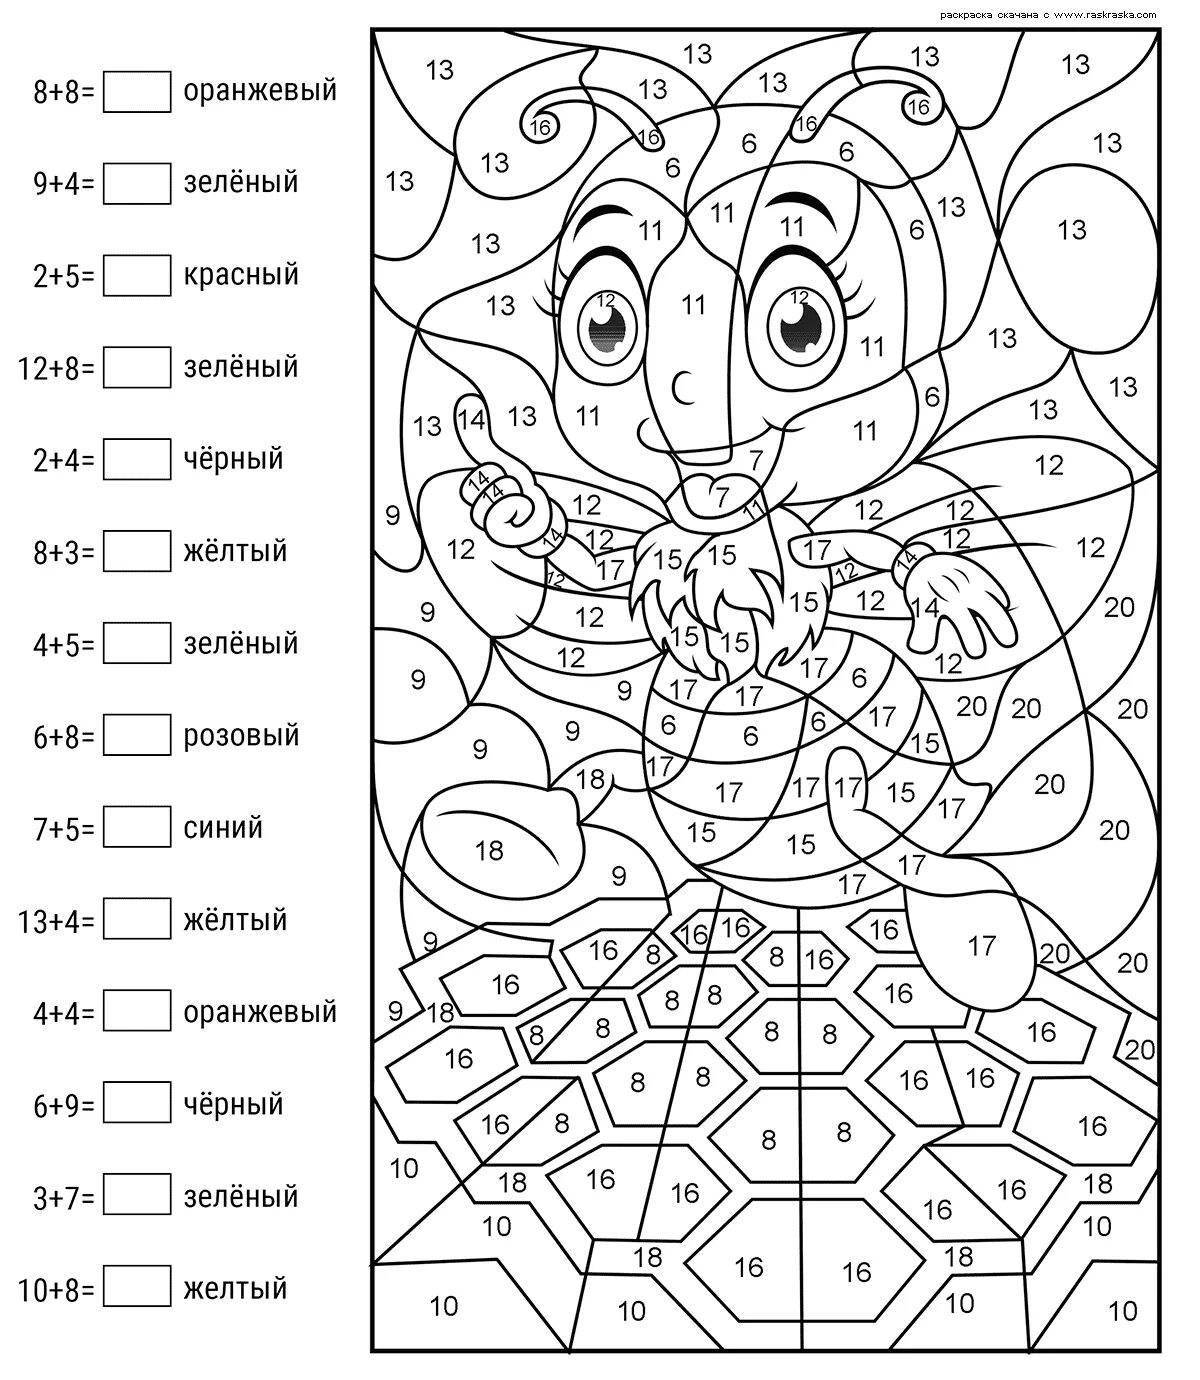 Creative coloring for girls 9-10 years old by numbers